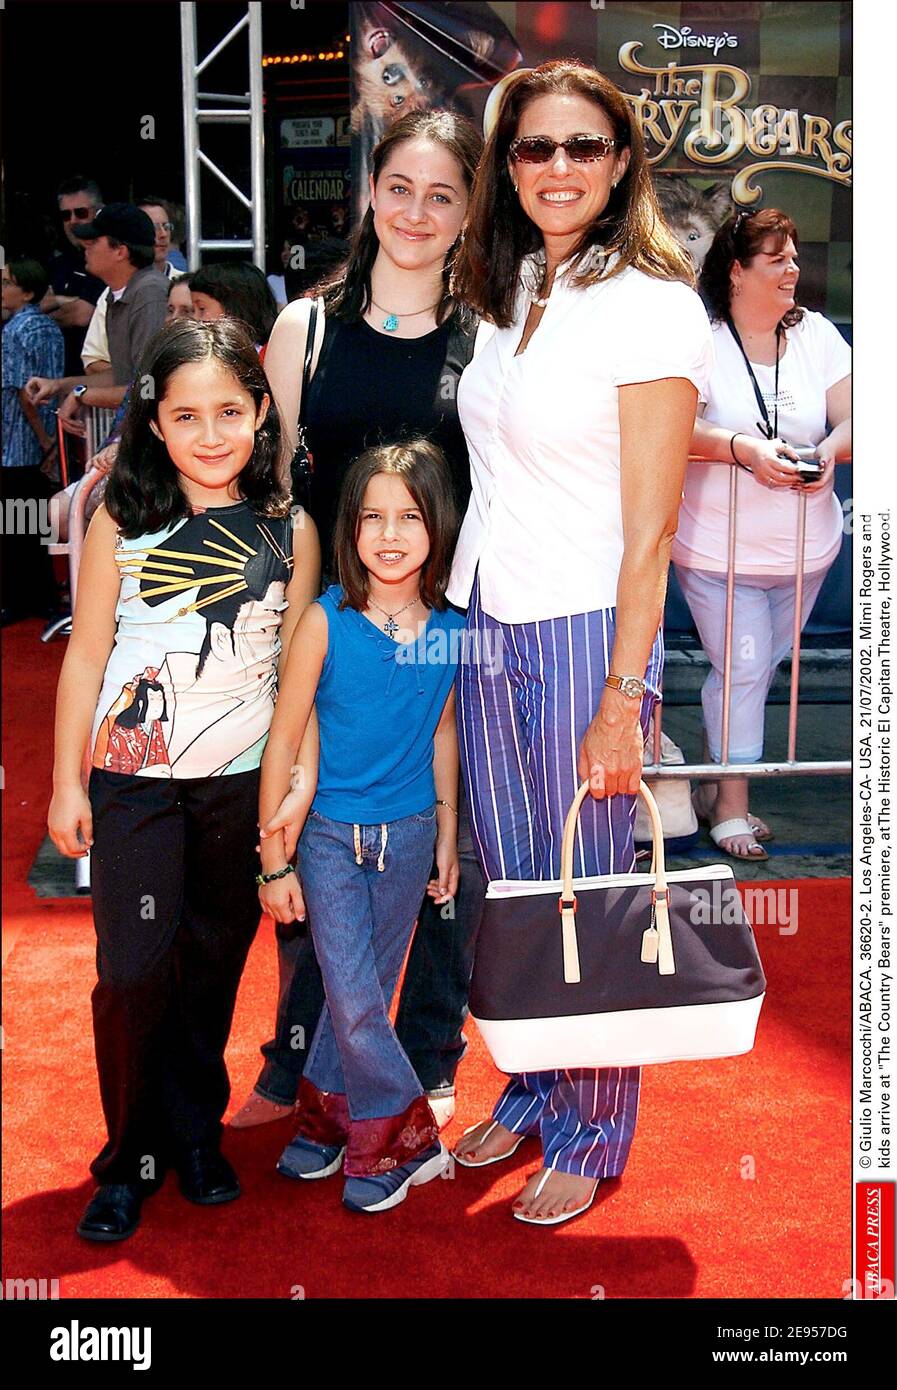 © Giulio Marcocchi/ABACA. 36620-2. Los Angeles-CA- USA. 21/07/2002. Mimi Rogers and kids arrive at The Country Bears premiere, at The Historic El Capitan Theatre, Hollywood. Stock Photo